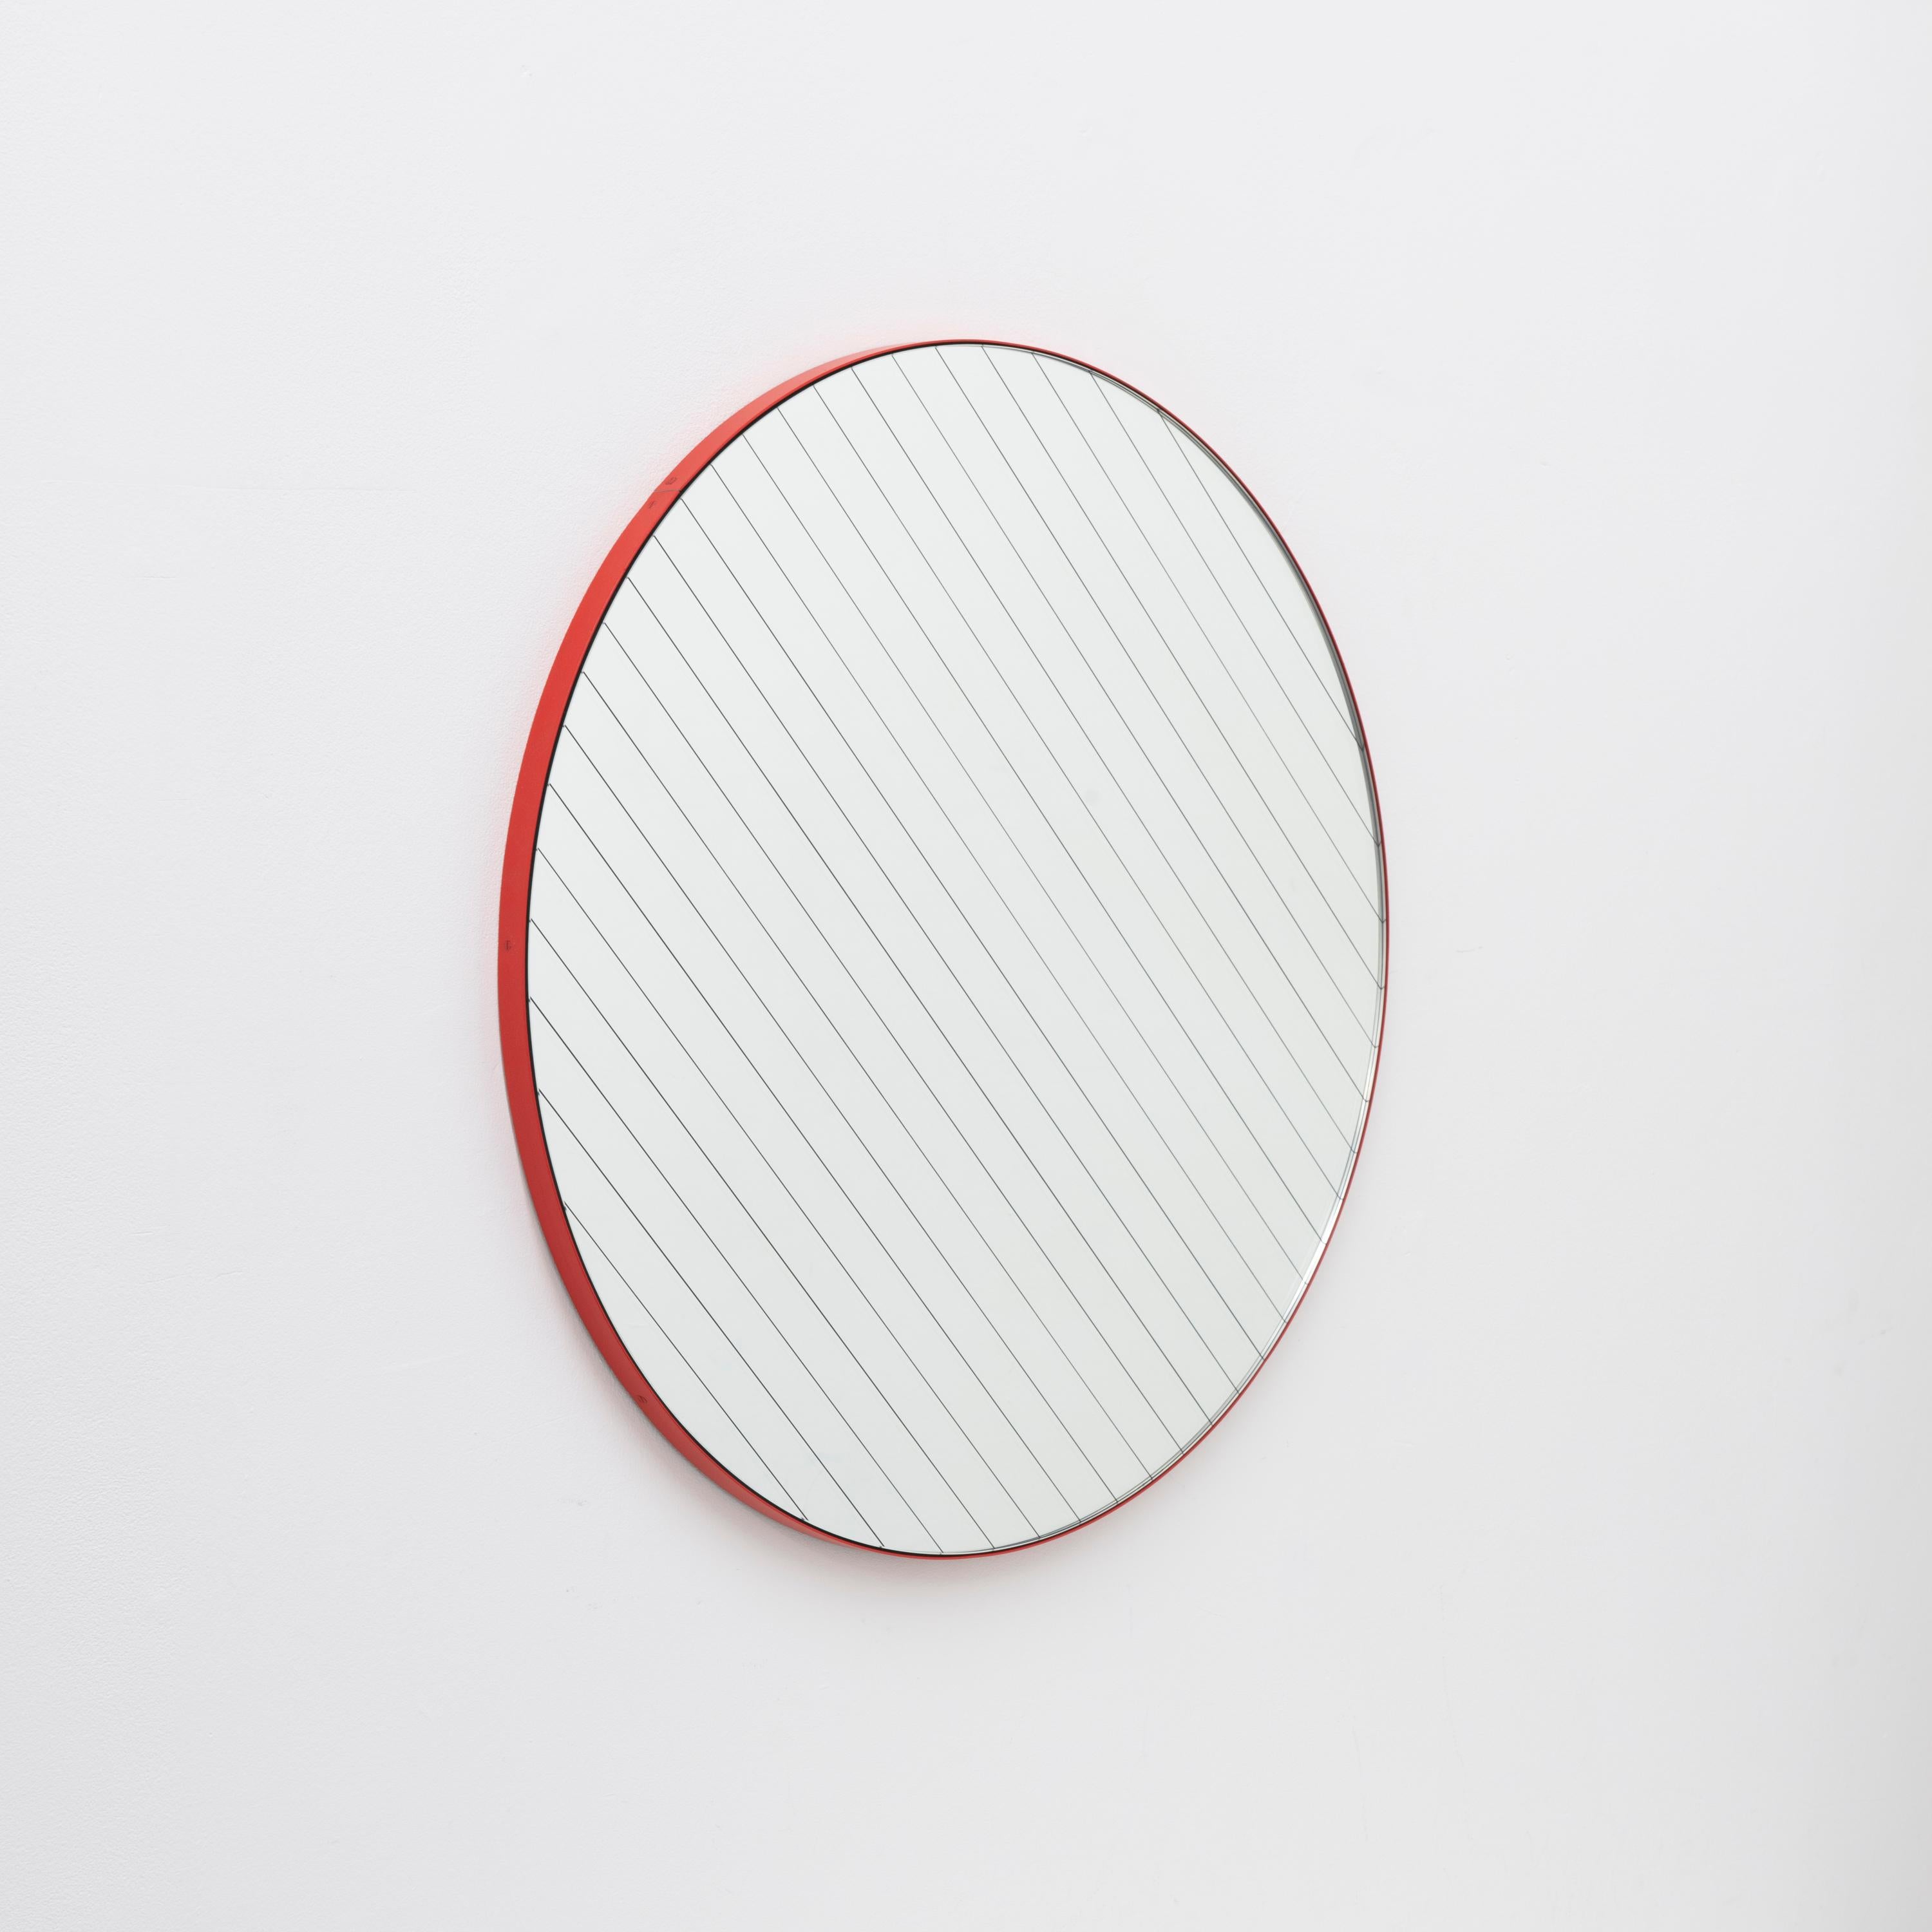 Organic Modern In Stock Orbis Linus Round Mirror with Etched Strips and Red Frame, Medium For Sale